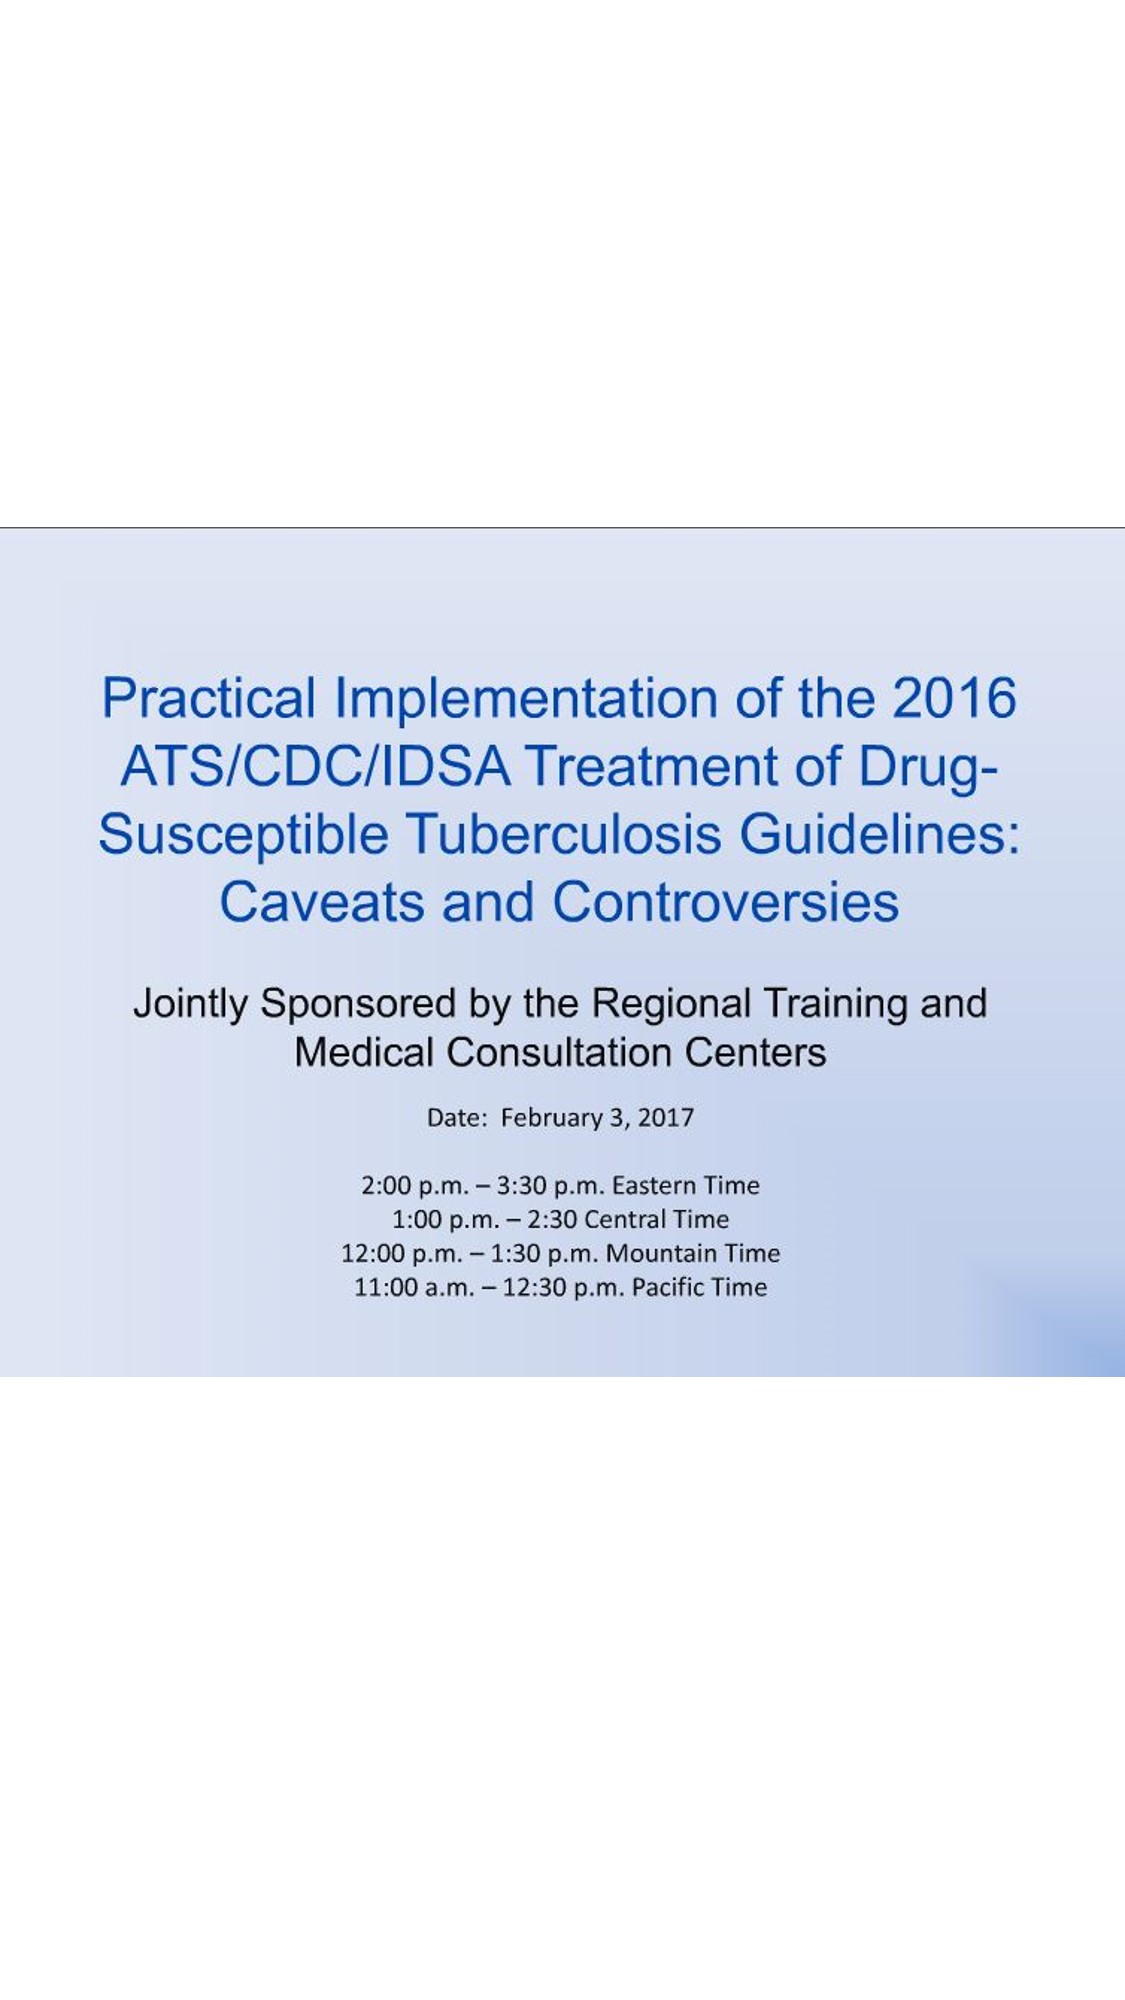 Practical Implementation of the 2016 ATS/CDC/IDSA Treatment of Drug Susceptible Tuberculosis Guidelines: Caveats and Controversies